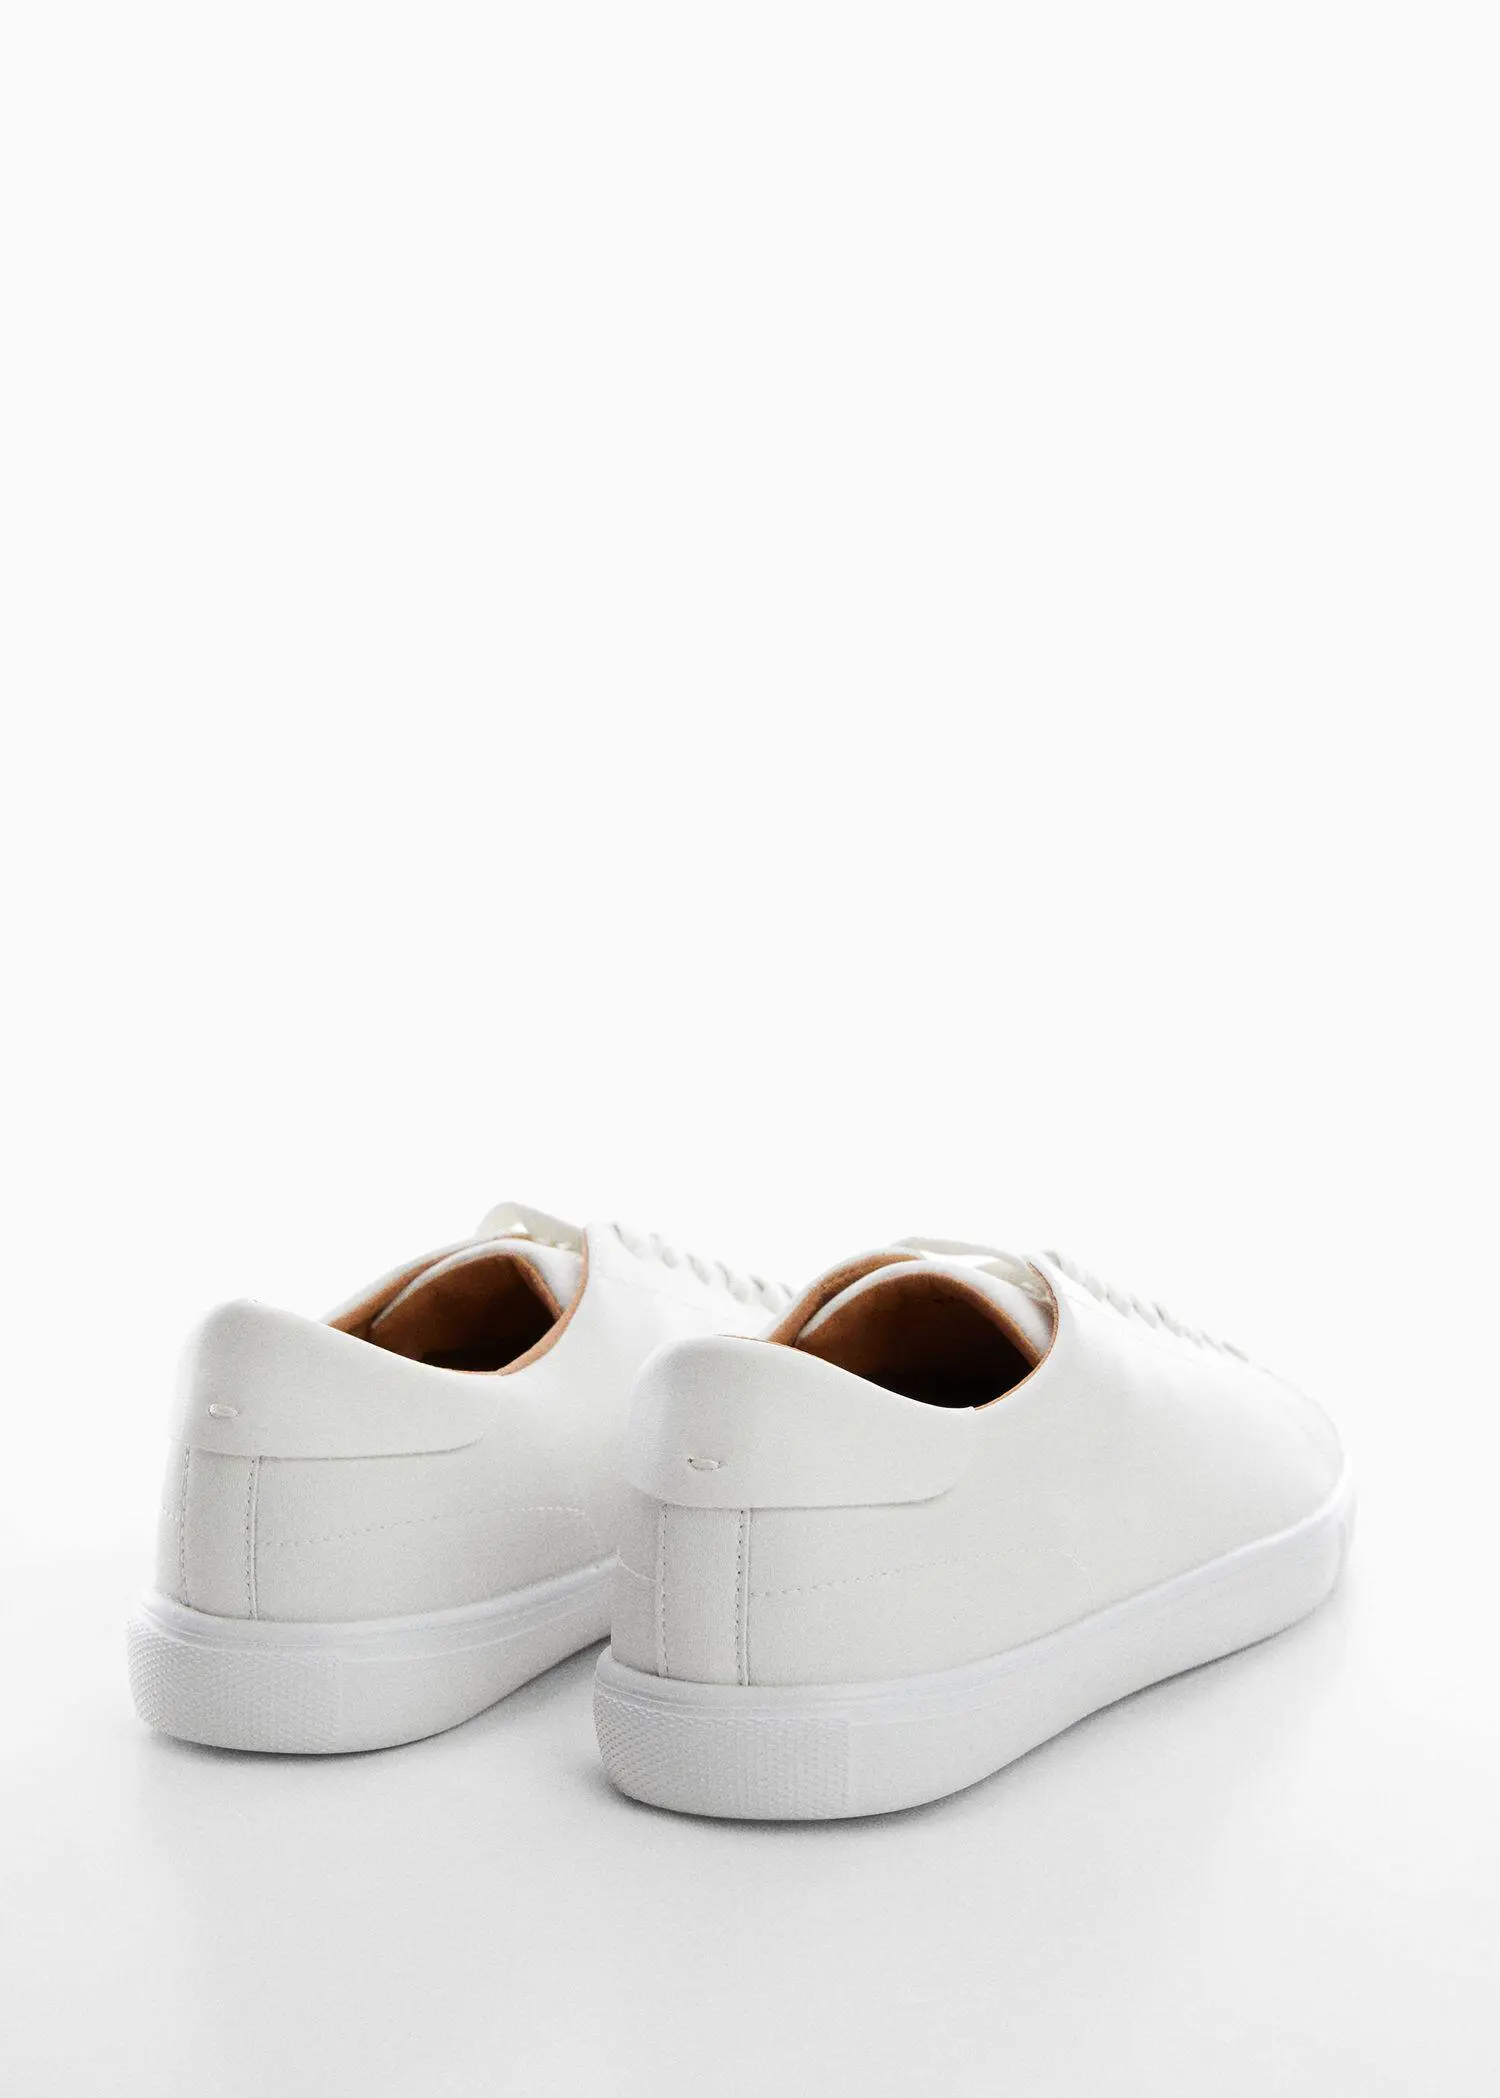 Mango Monocoloured leather sneakers. a pair of white sneakers on a white surface. 